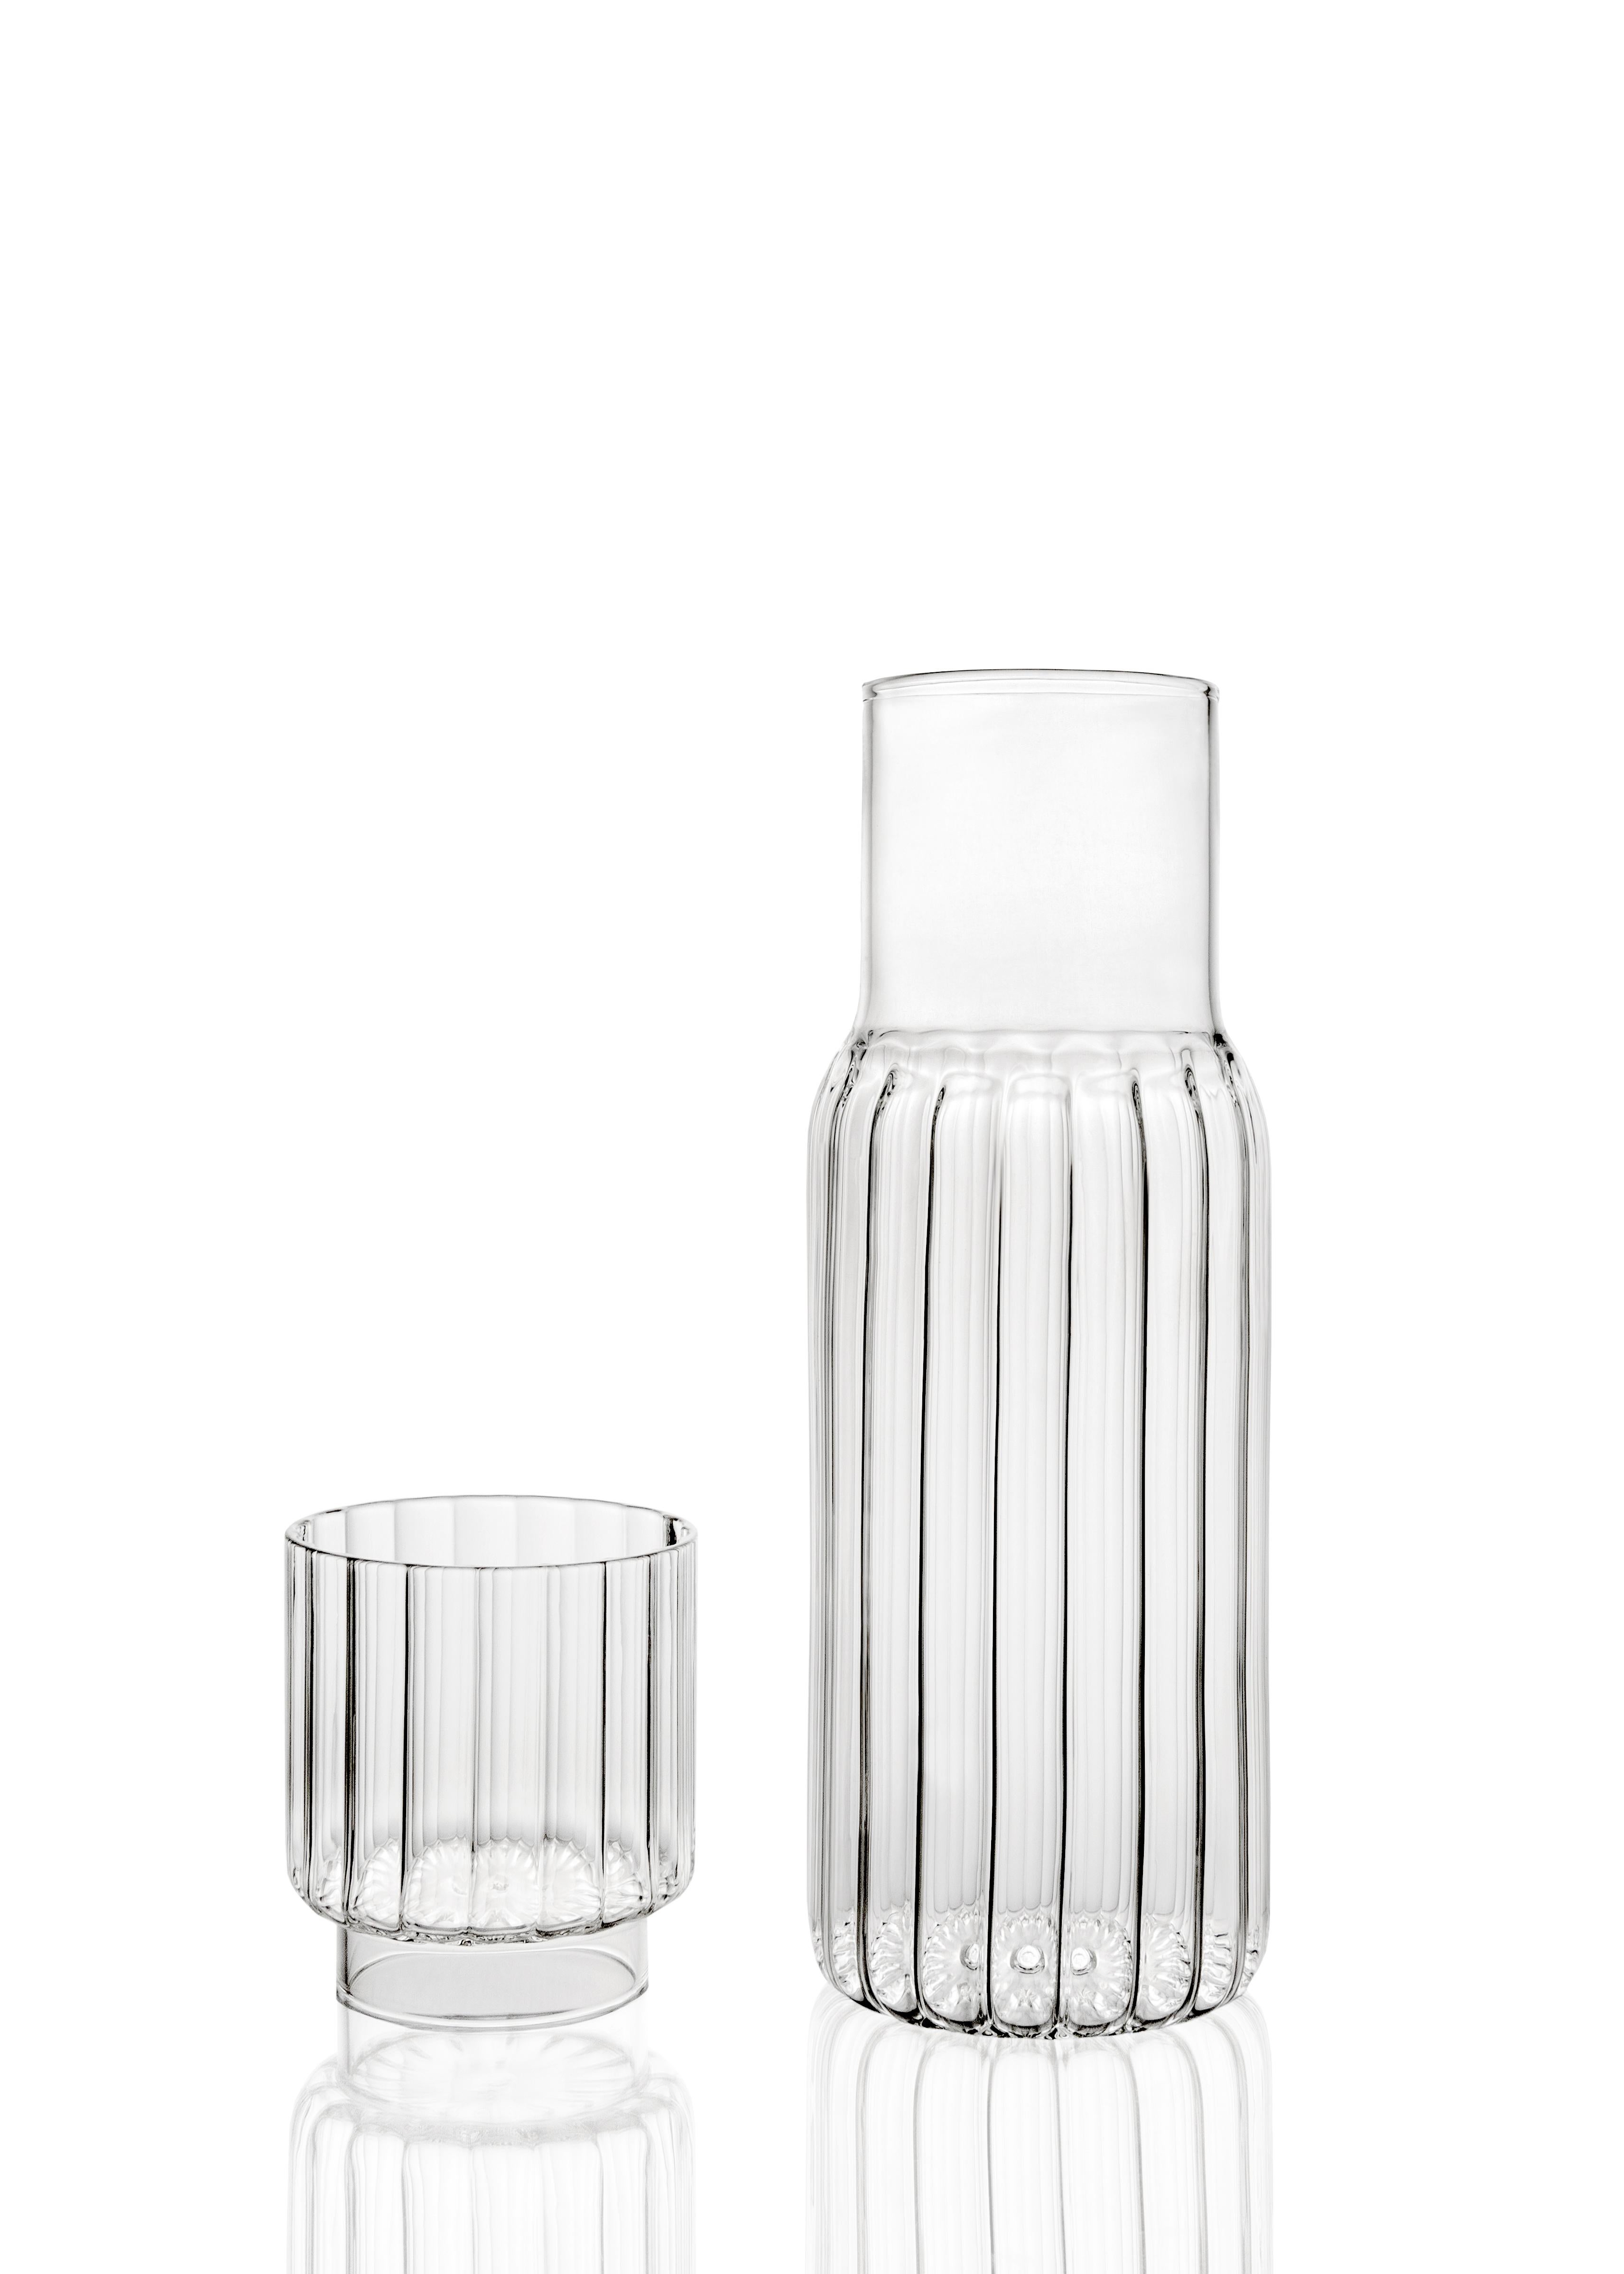 The linear form of the PILLAR carafe is inspired by architecture, and characterized by an understated yet imposing appeal.

A PILLAR tumbler glass is included in the set, serving as a lid for this versatile container that compliments the nightstand